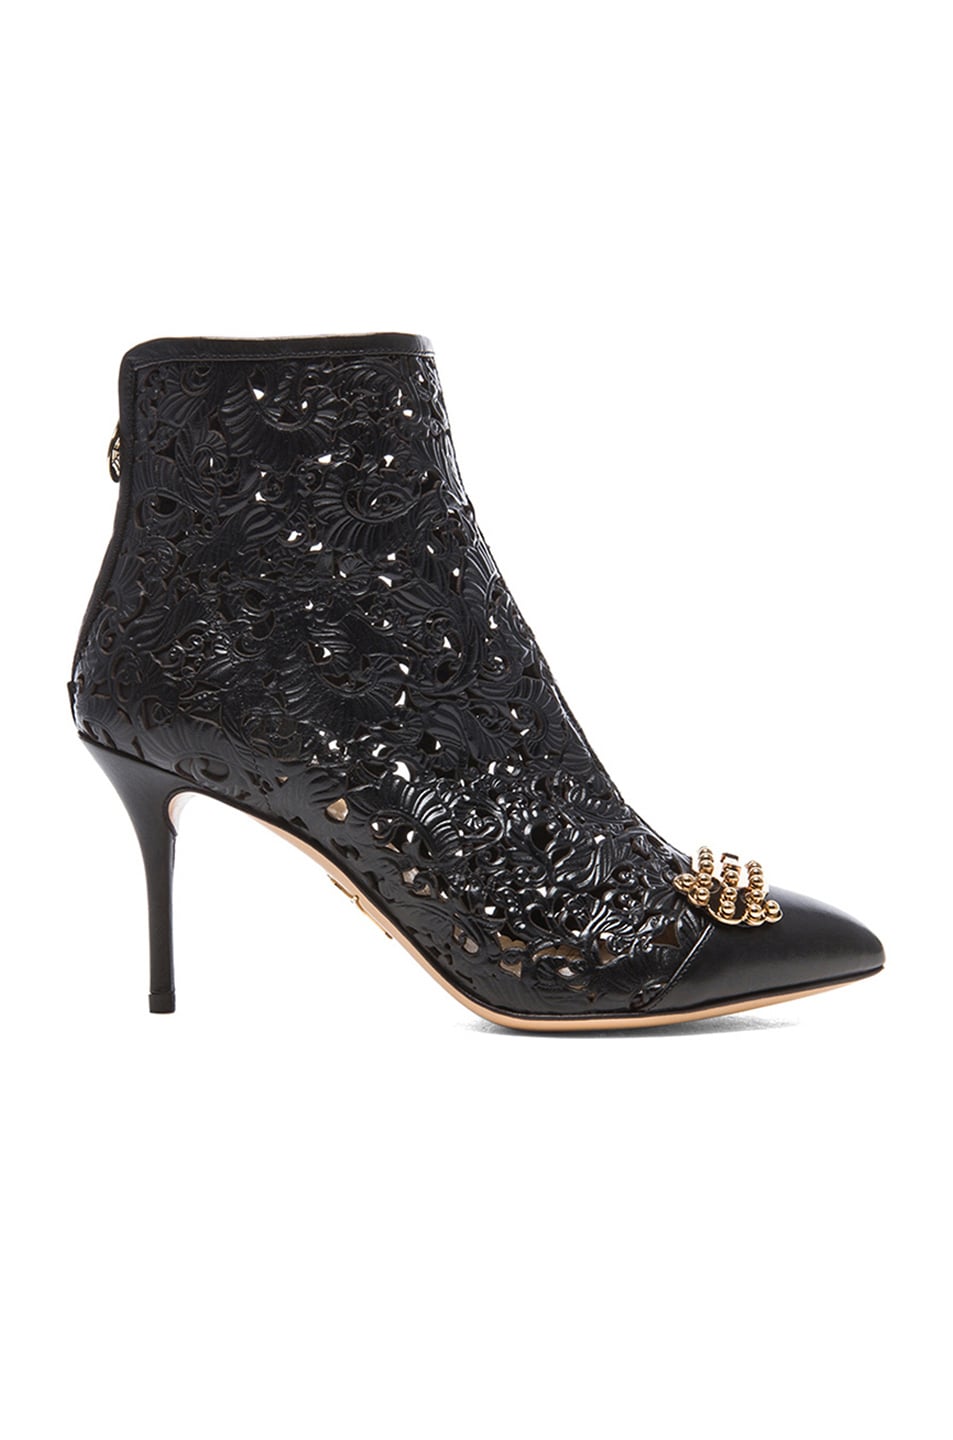 Image 1 of Charlotte Olympia Myrtle Leather Booties in Onyx